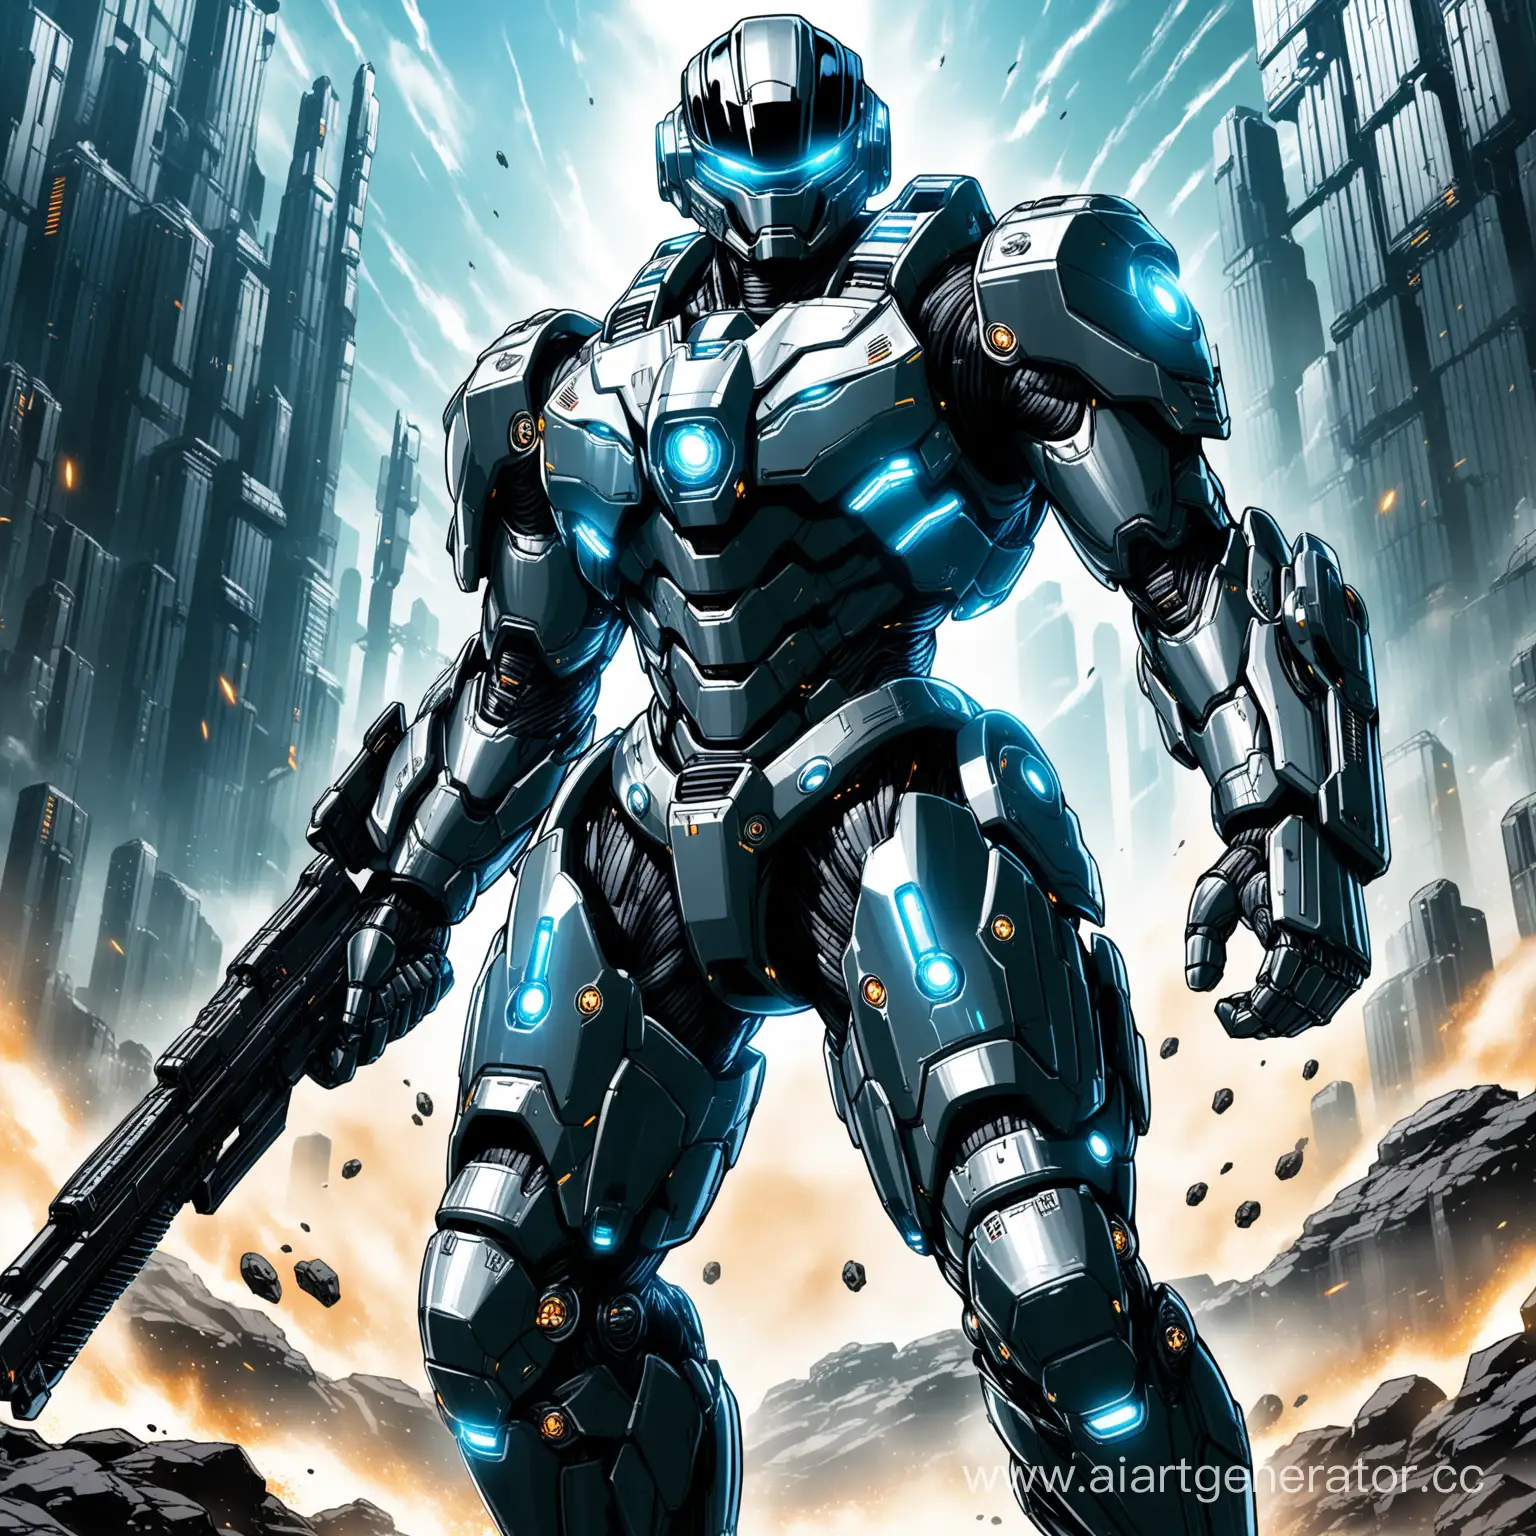 FHATCAL-WARRIORS-Robocop-3000-in-Epic-Battle-Pose-with-HighTech-Armor